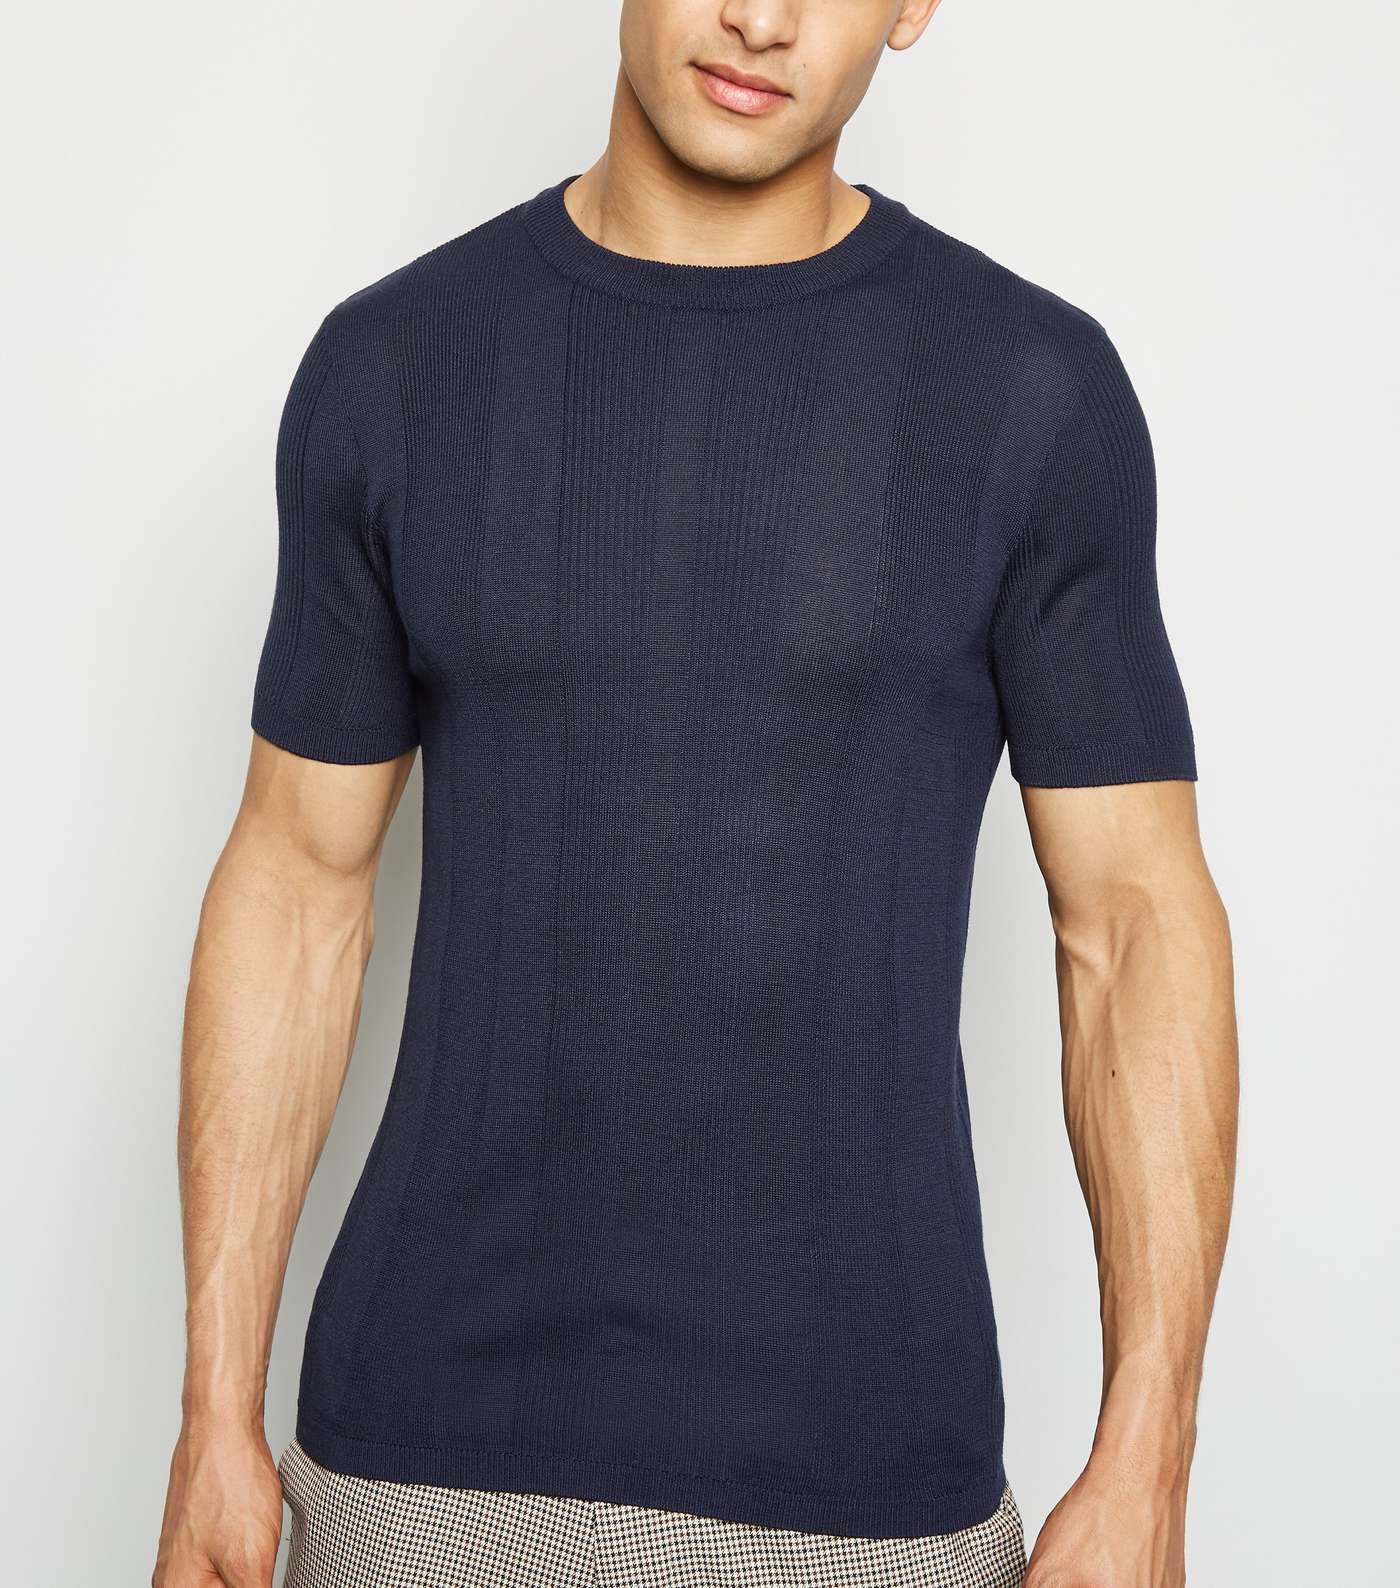 Navy Knit Short Sleeve Muscle Fit T-Shirt